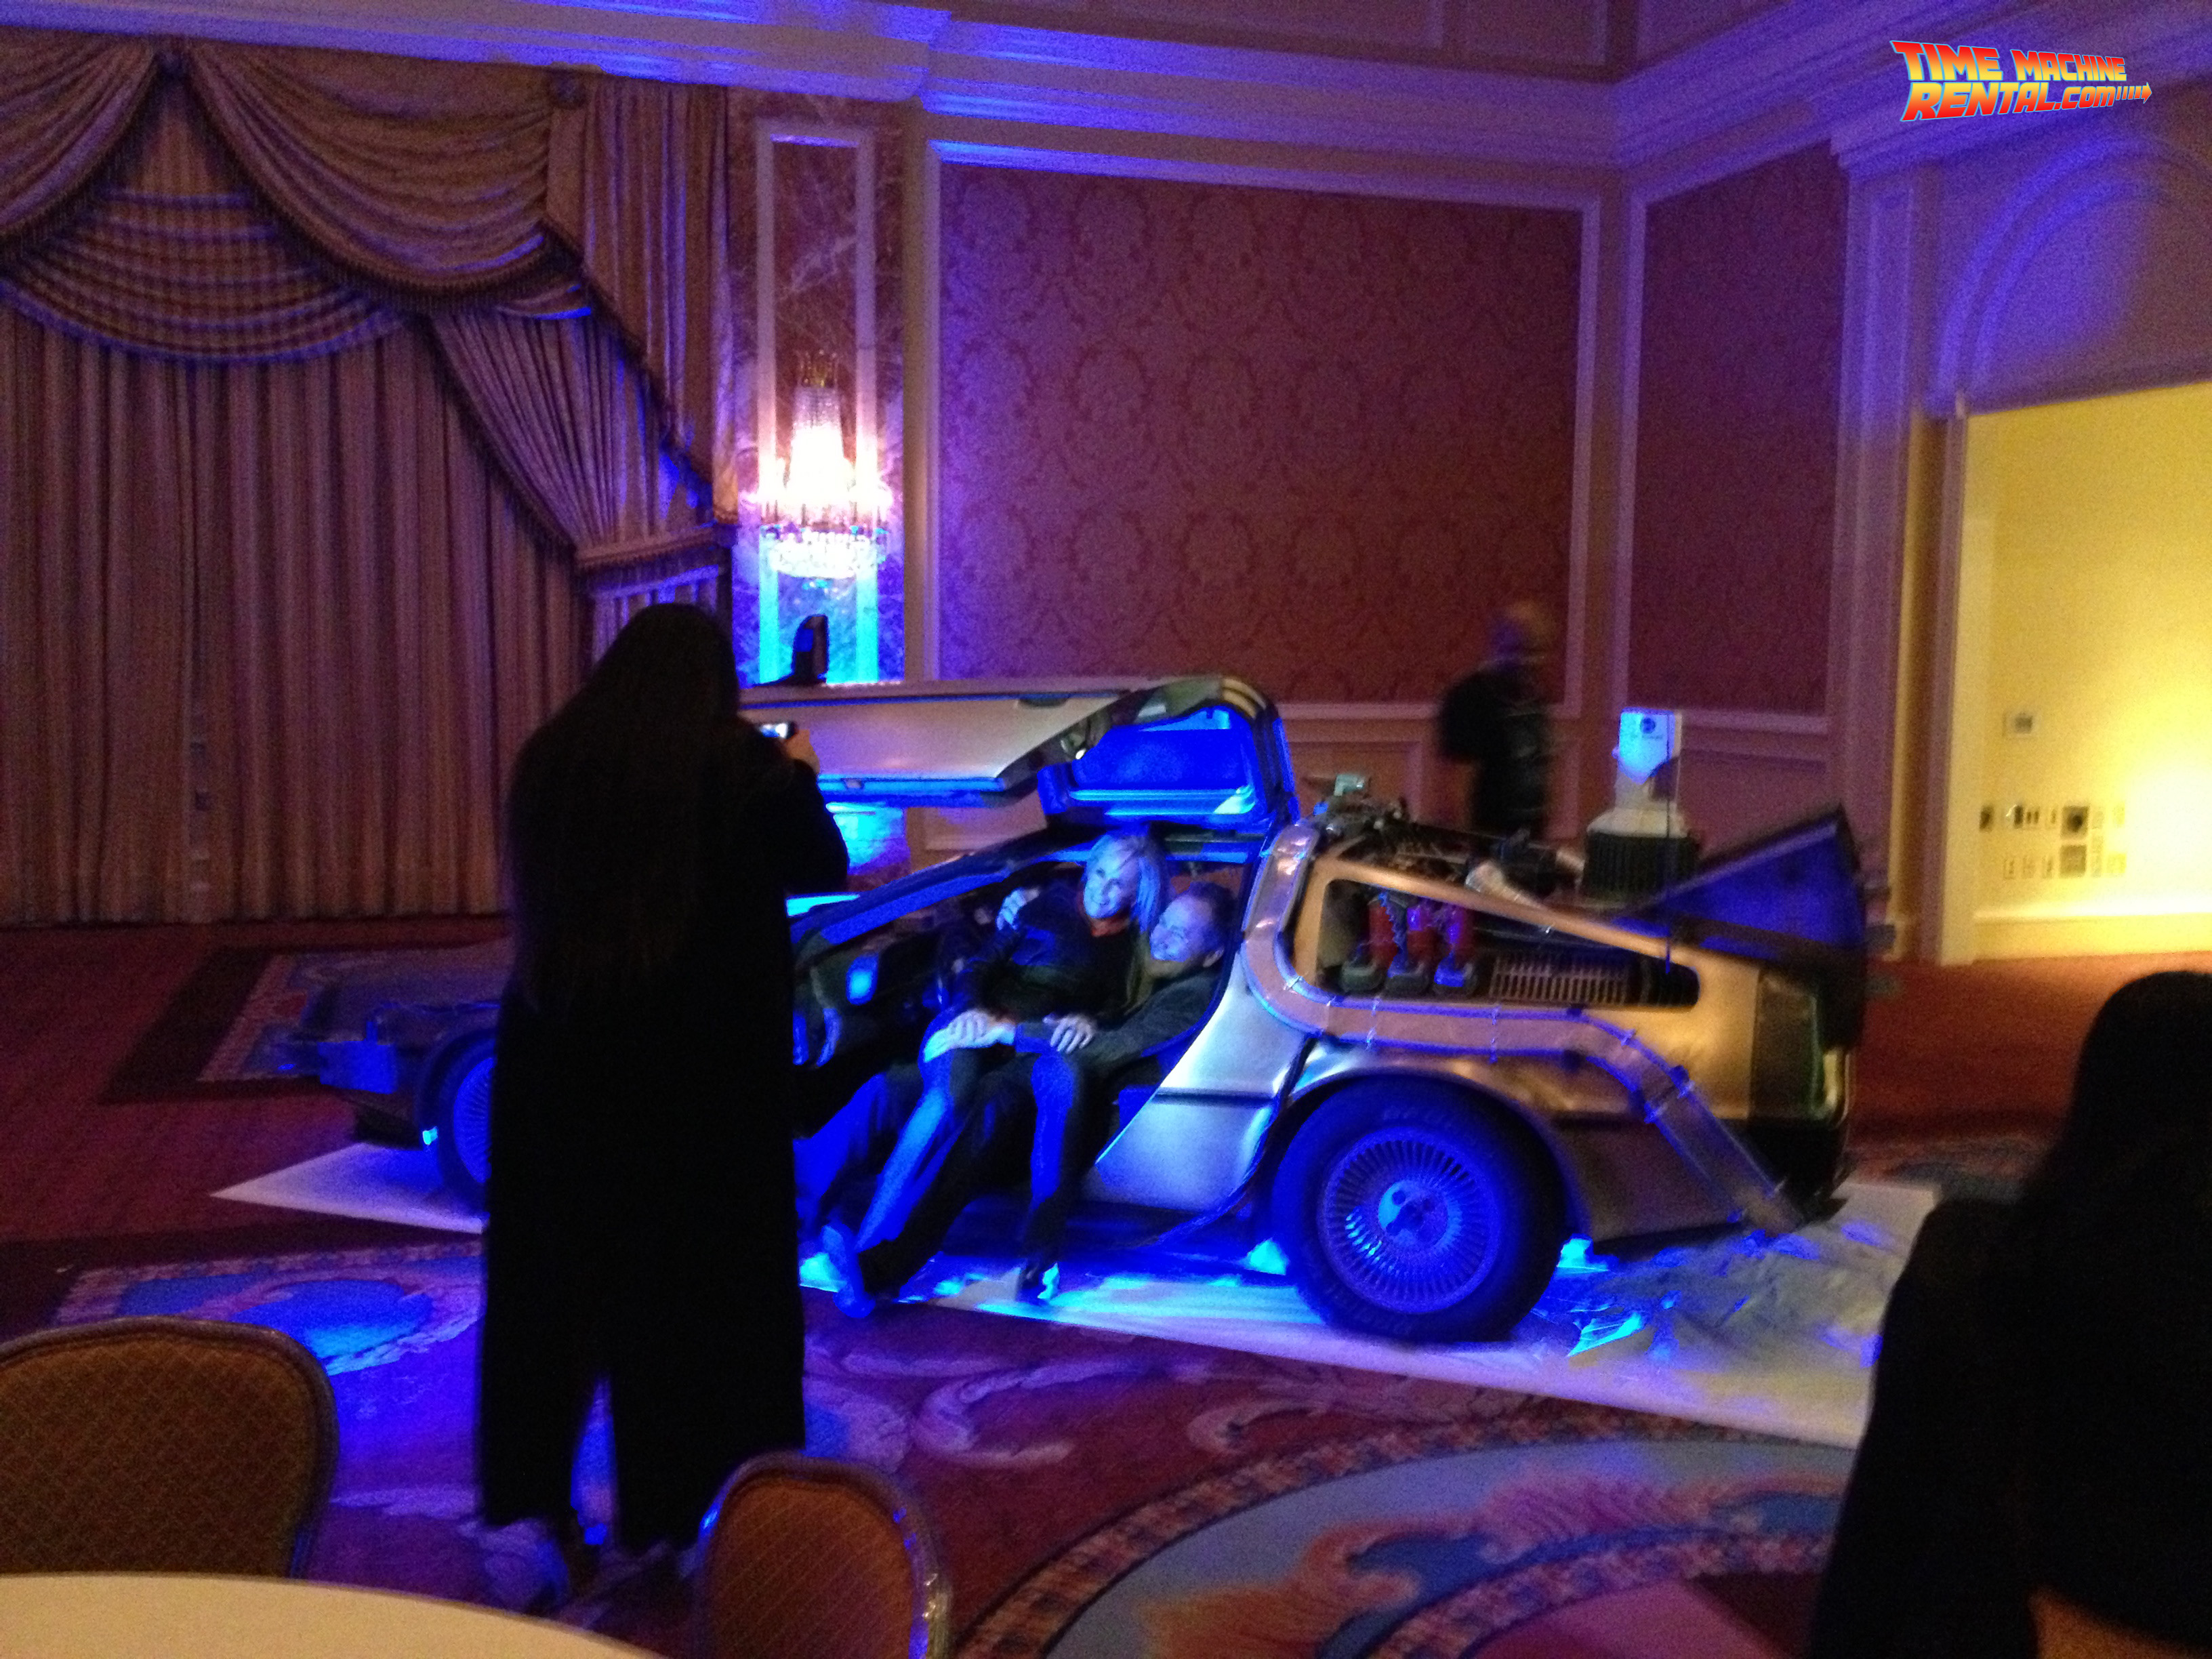 Lighting the DeLorean Time Machine can be a lot of fun for event planners.